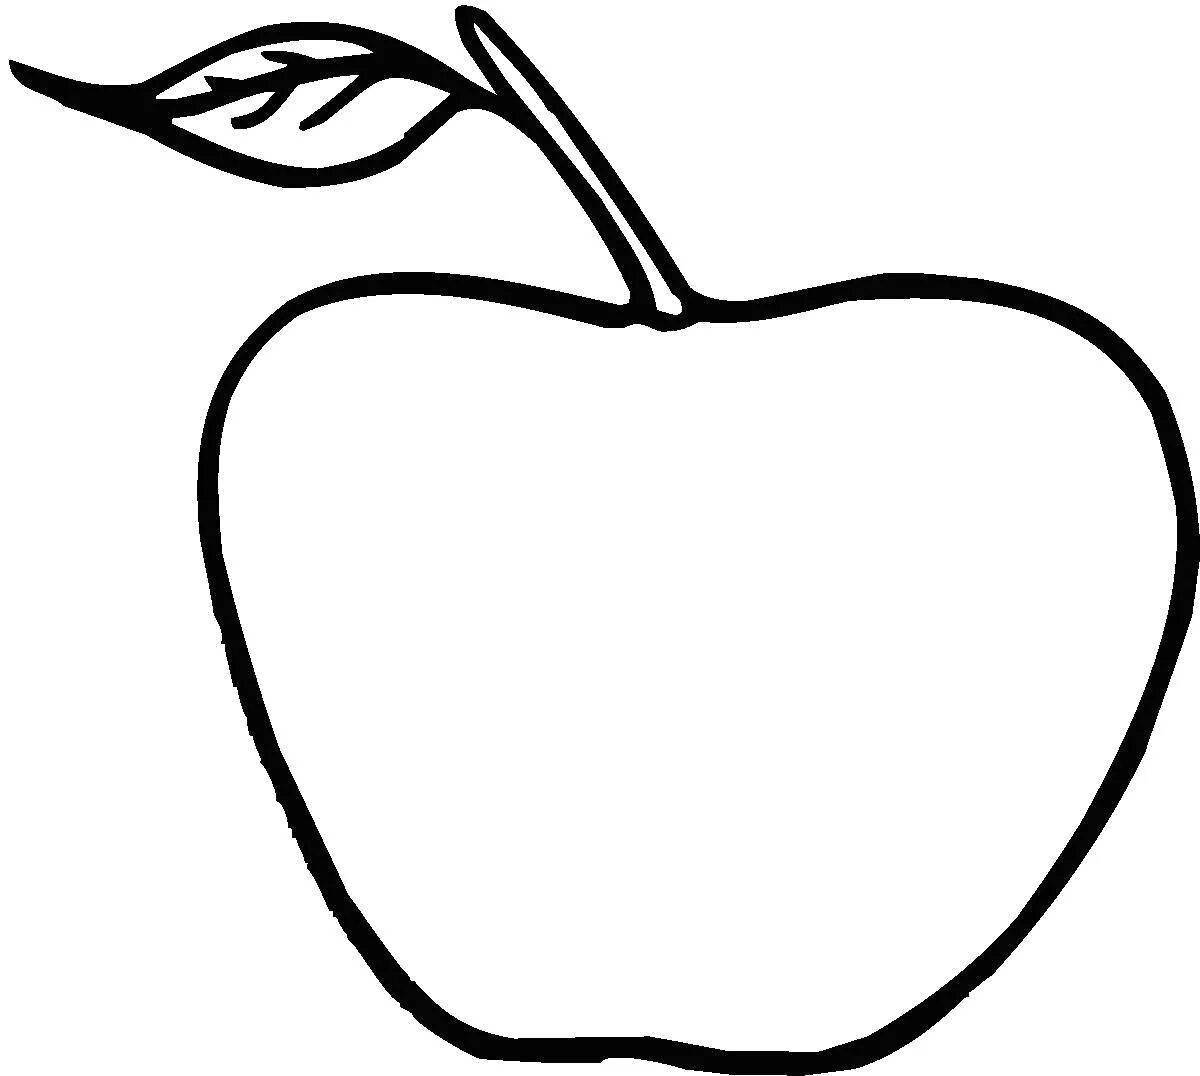 Coloring book shining apple pear